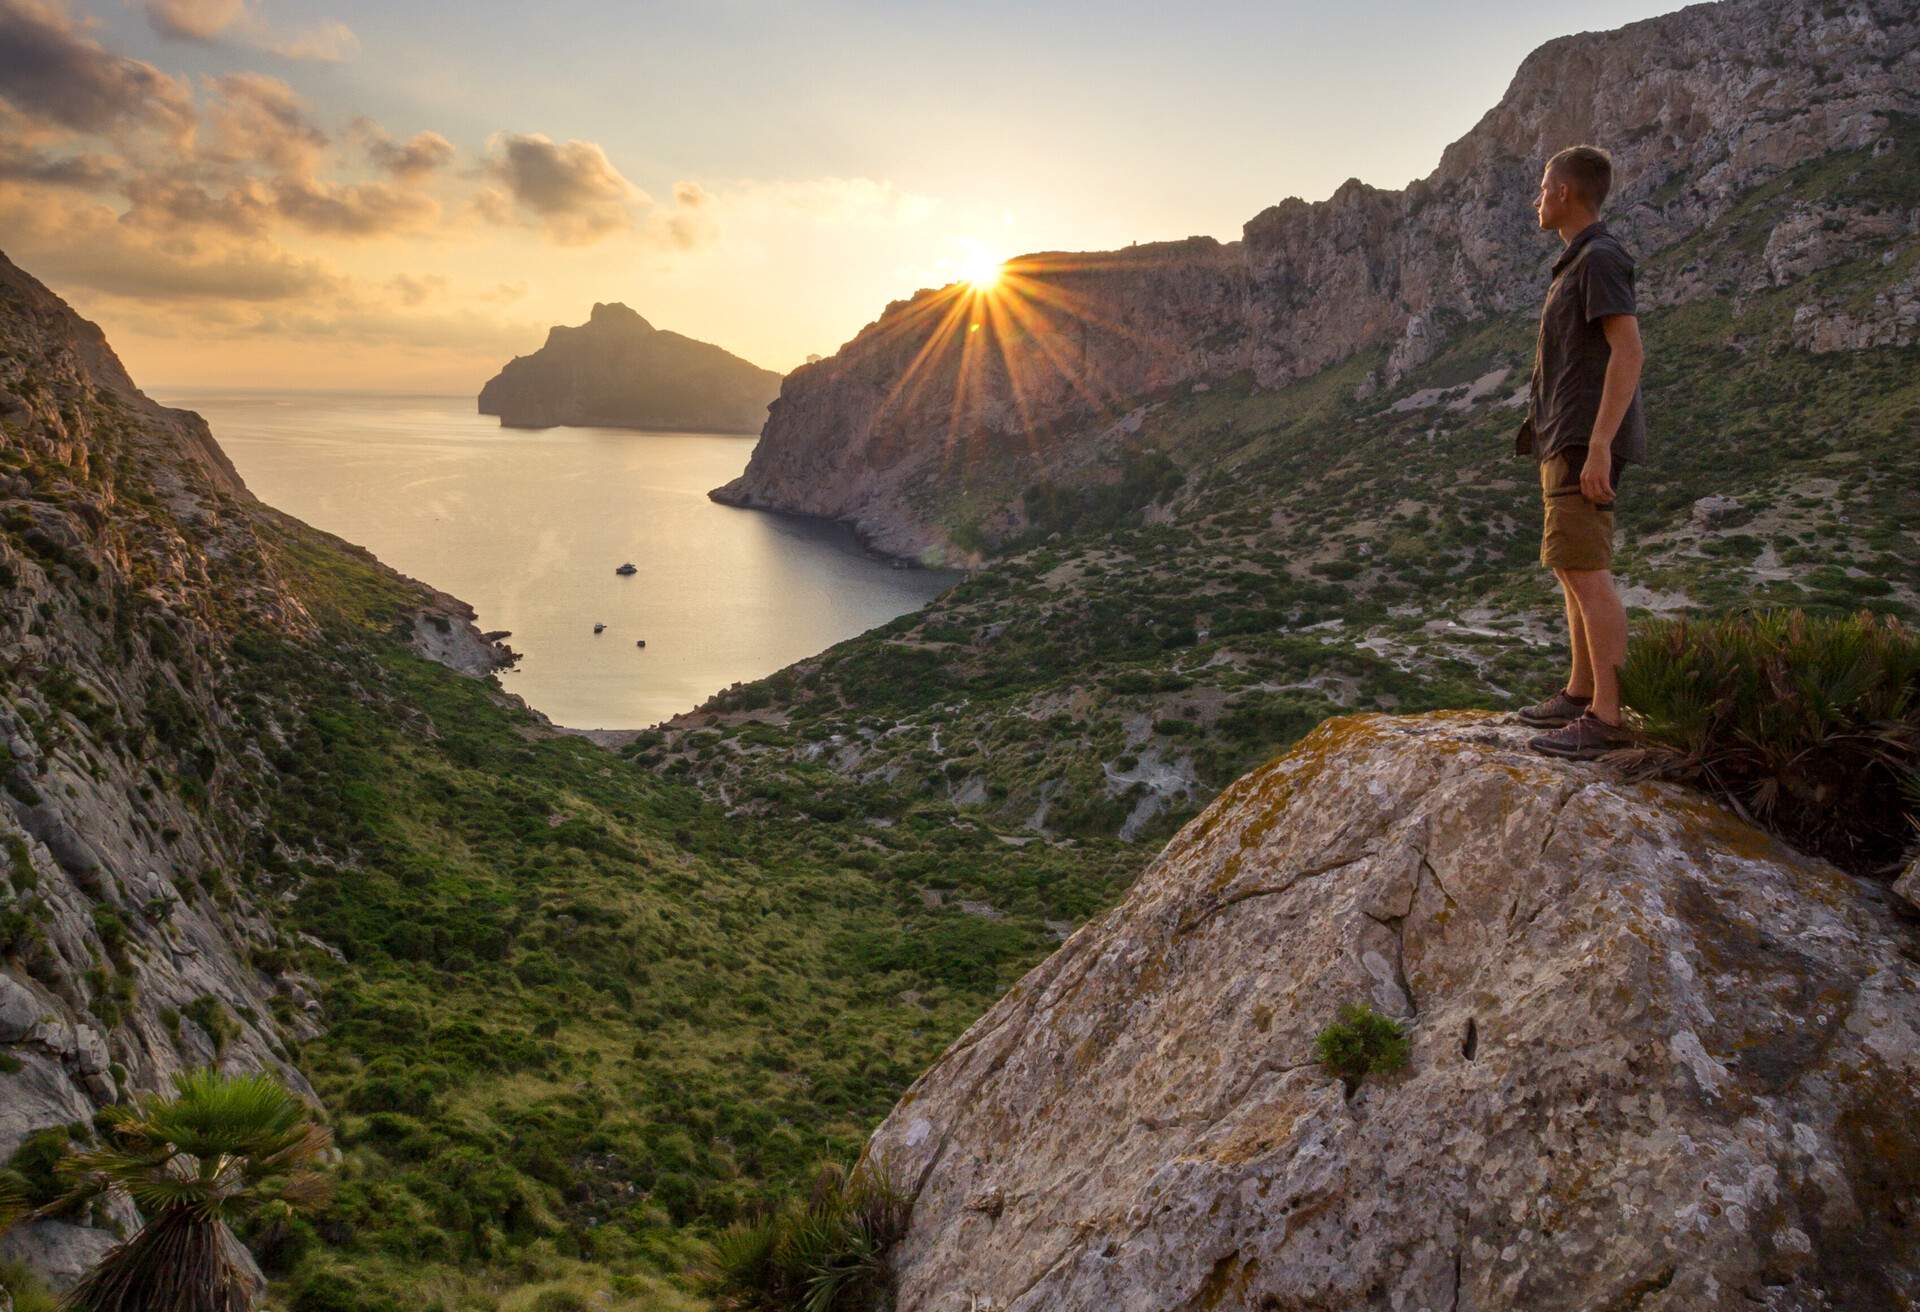 Incredible sunrise over Cap de Formentor and Cala Bóquer near Pollenca, Mallorca, Spain with a man on rock watching sunrise high above sea level; Shutterstock ID 1169584342; Brand (KAYAK, Momondo, Any): Any